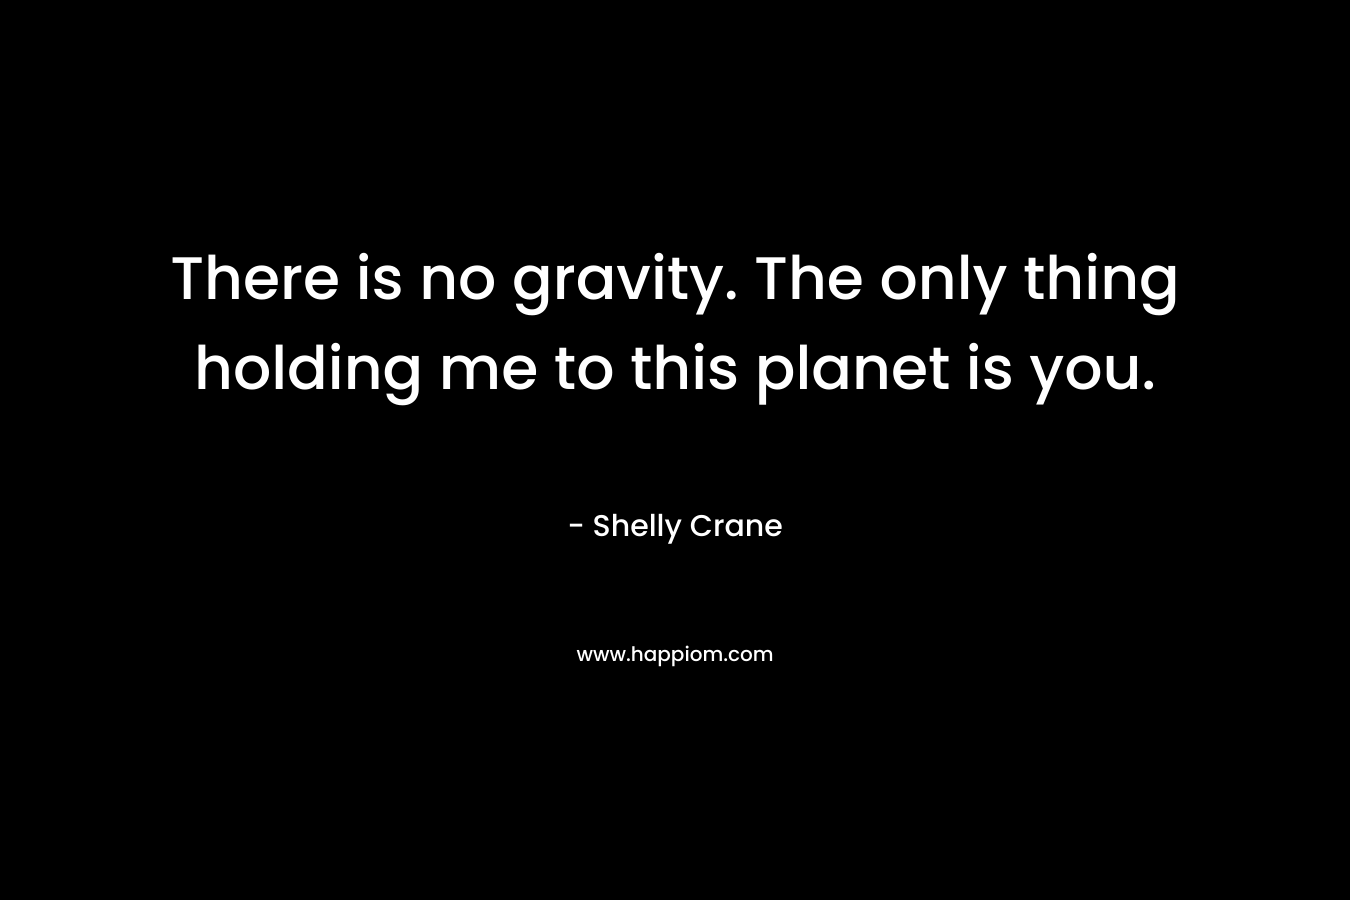 There is no gravity. The only thing holding me to this planet is you.